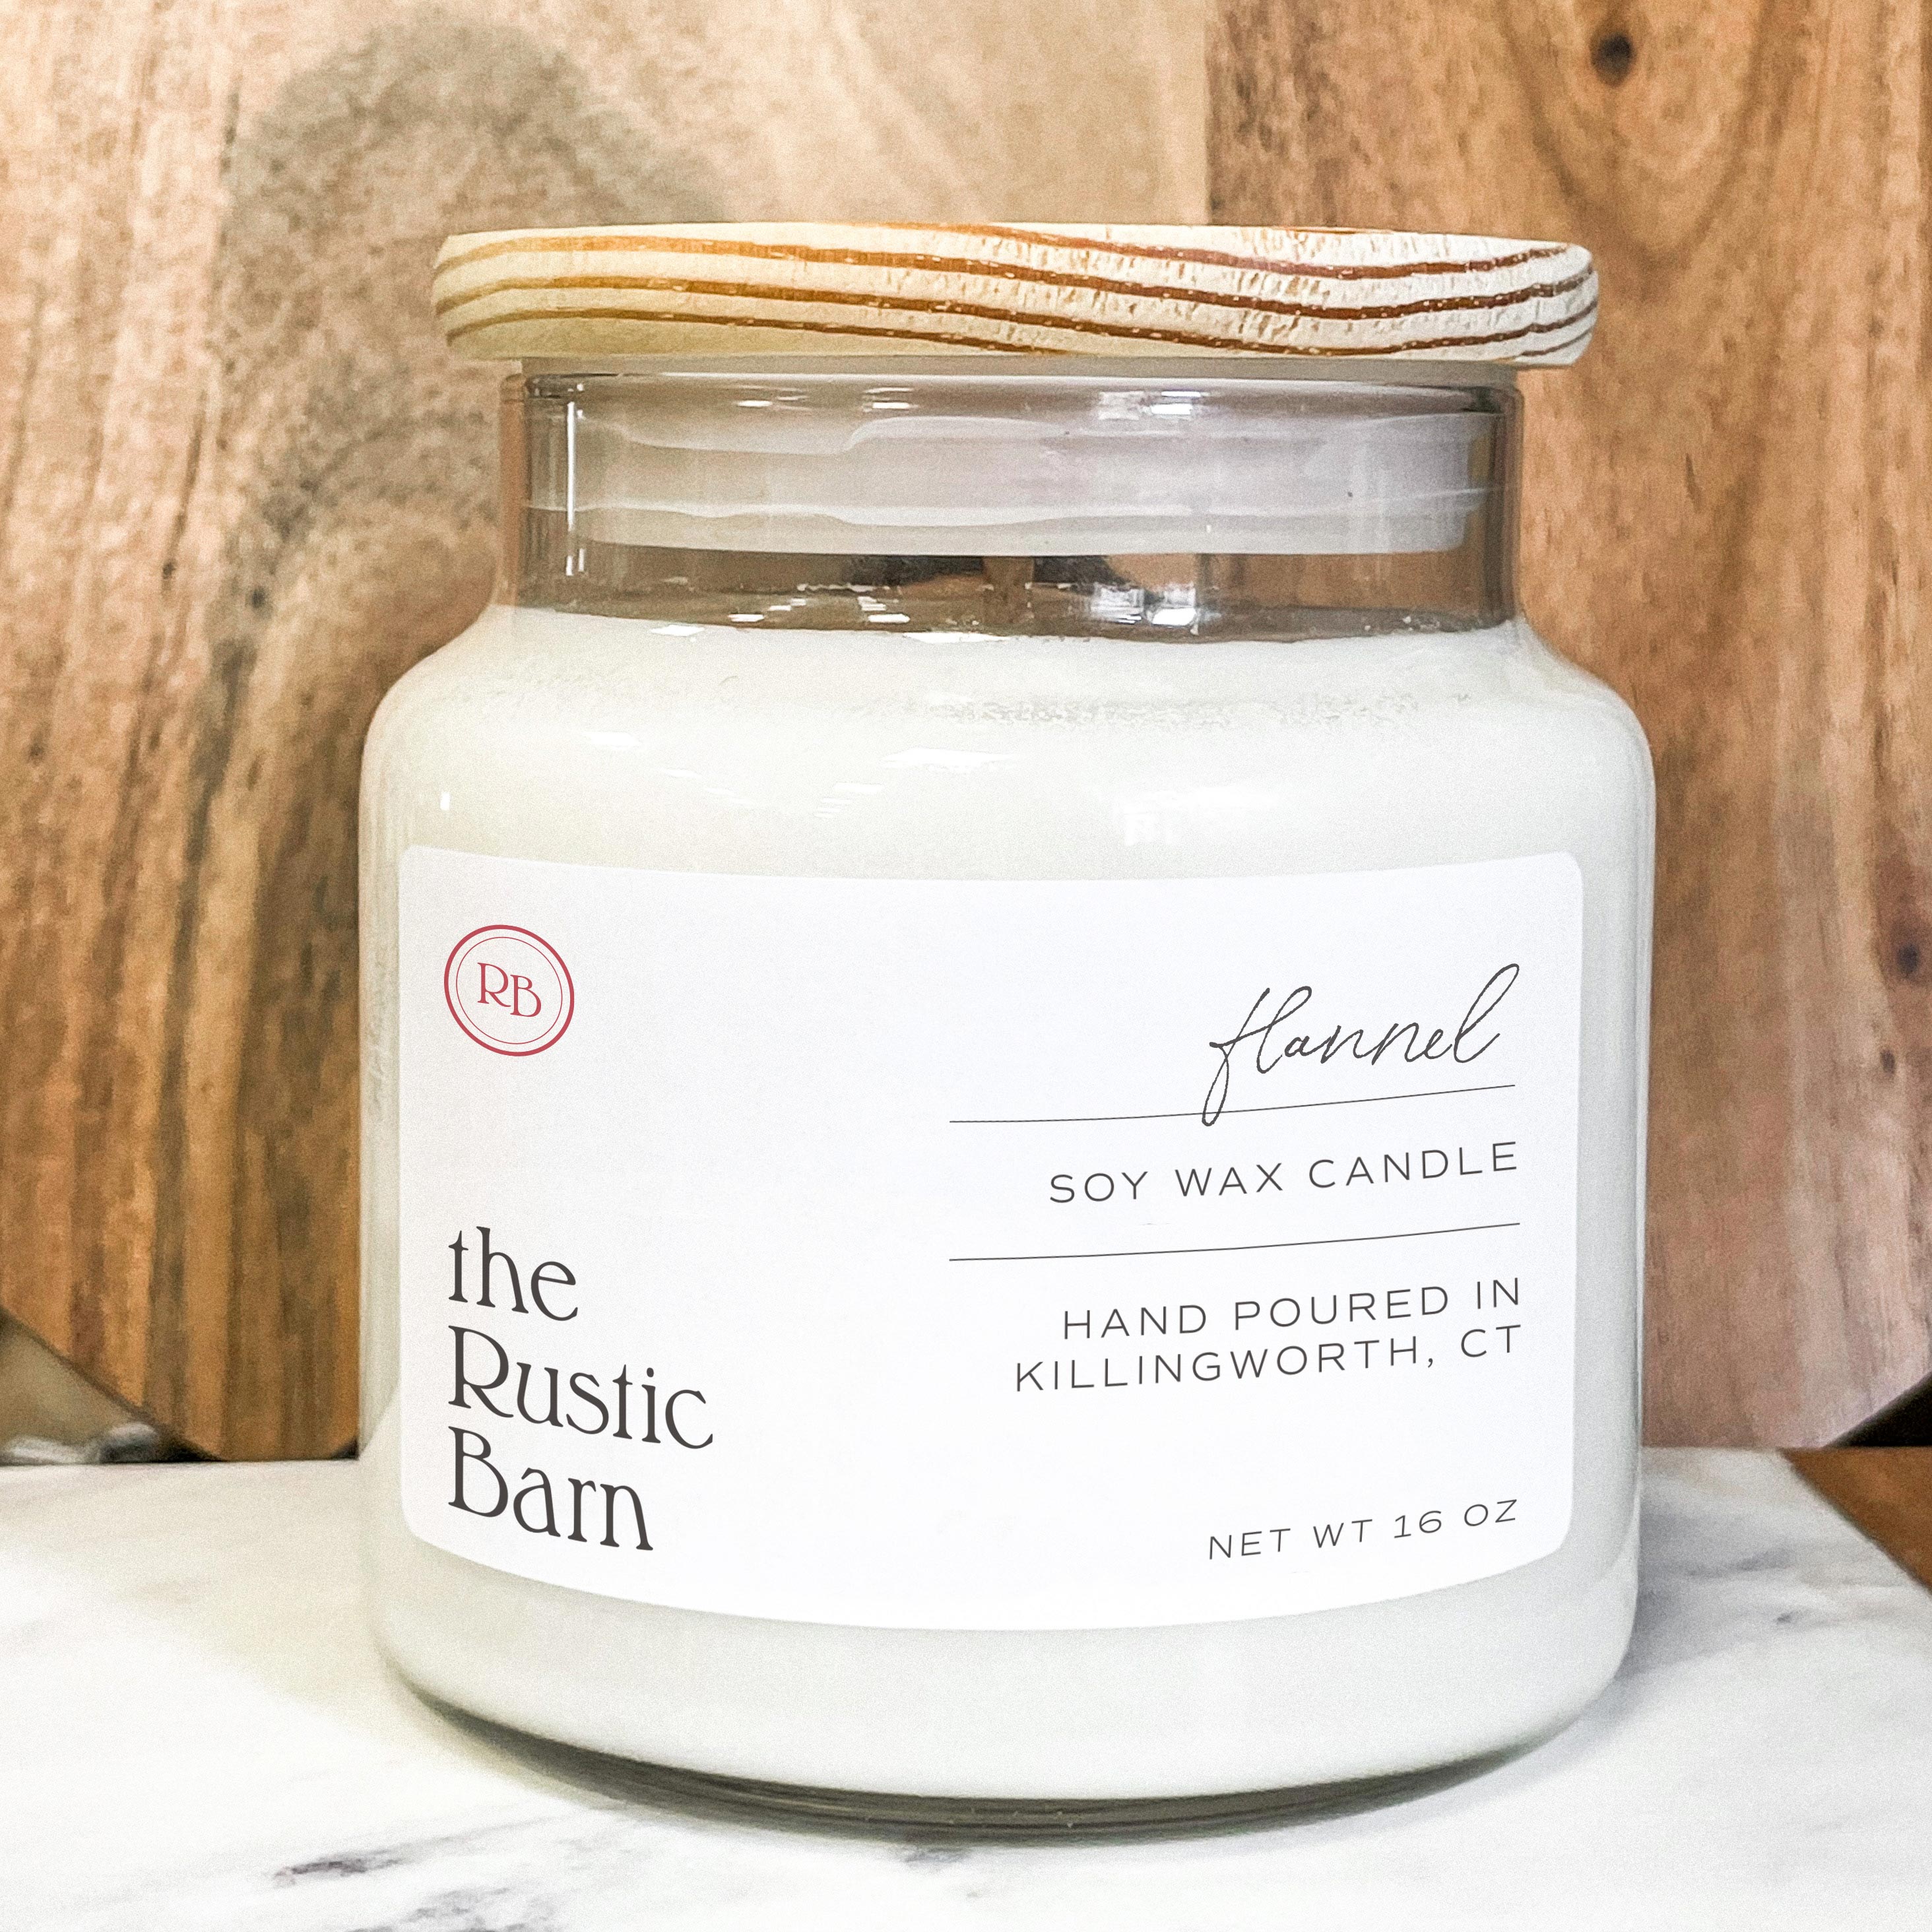 Flannel Hand Poured Soy Candle